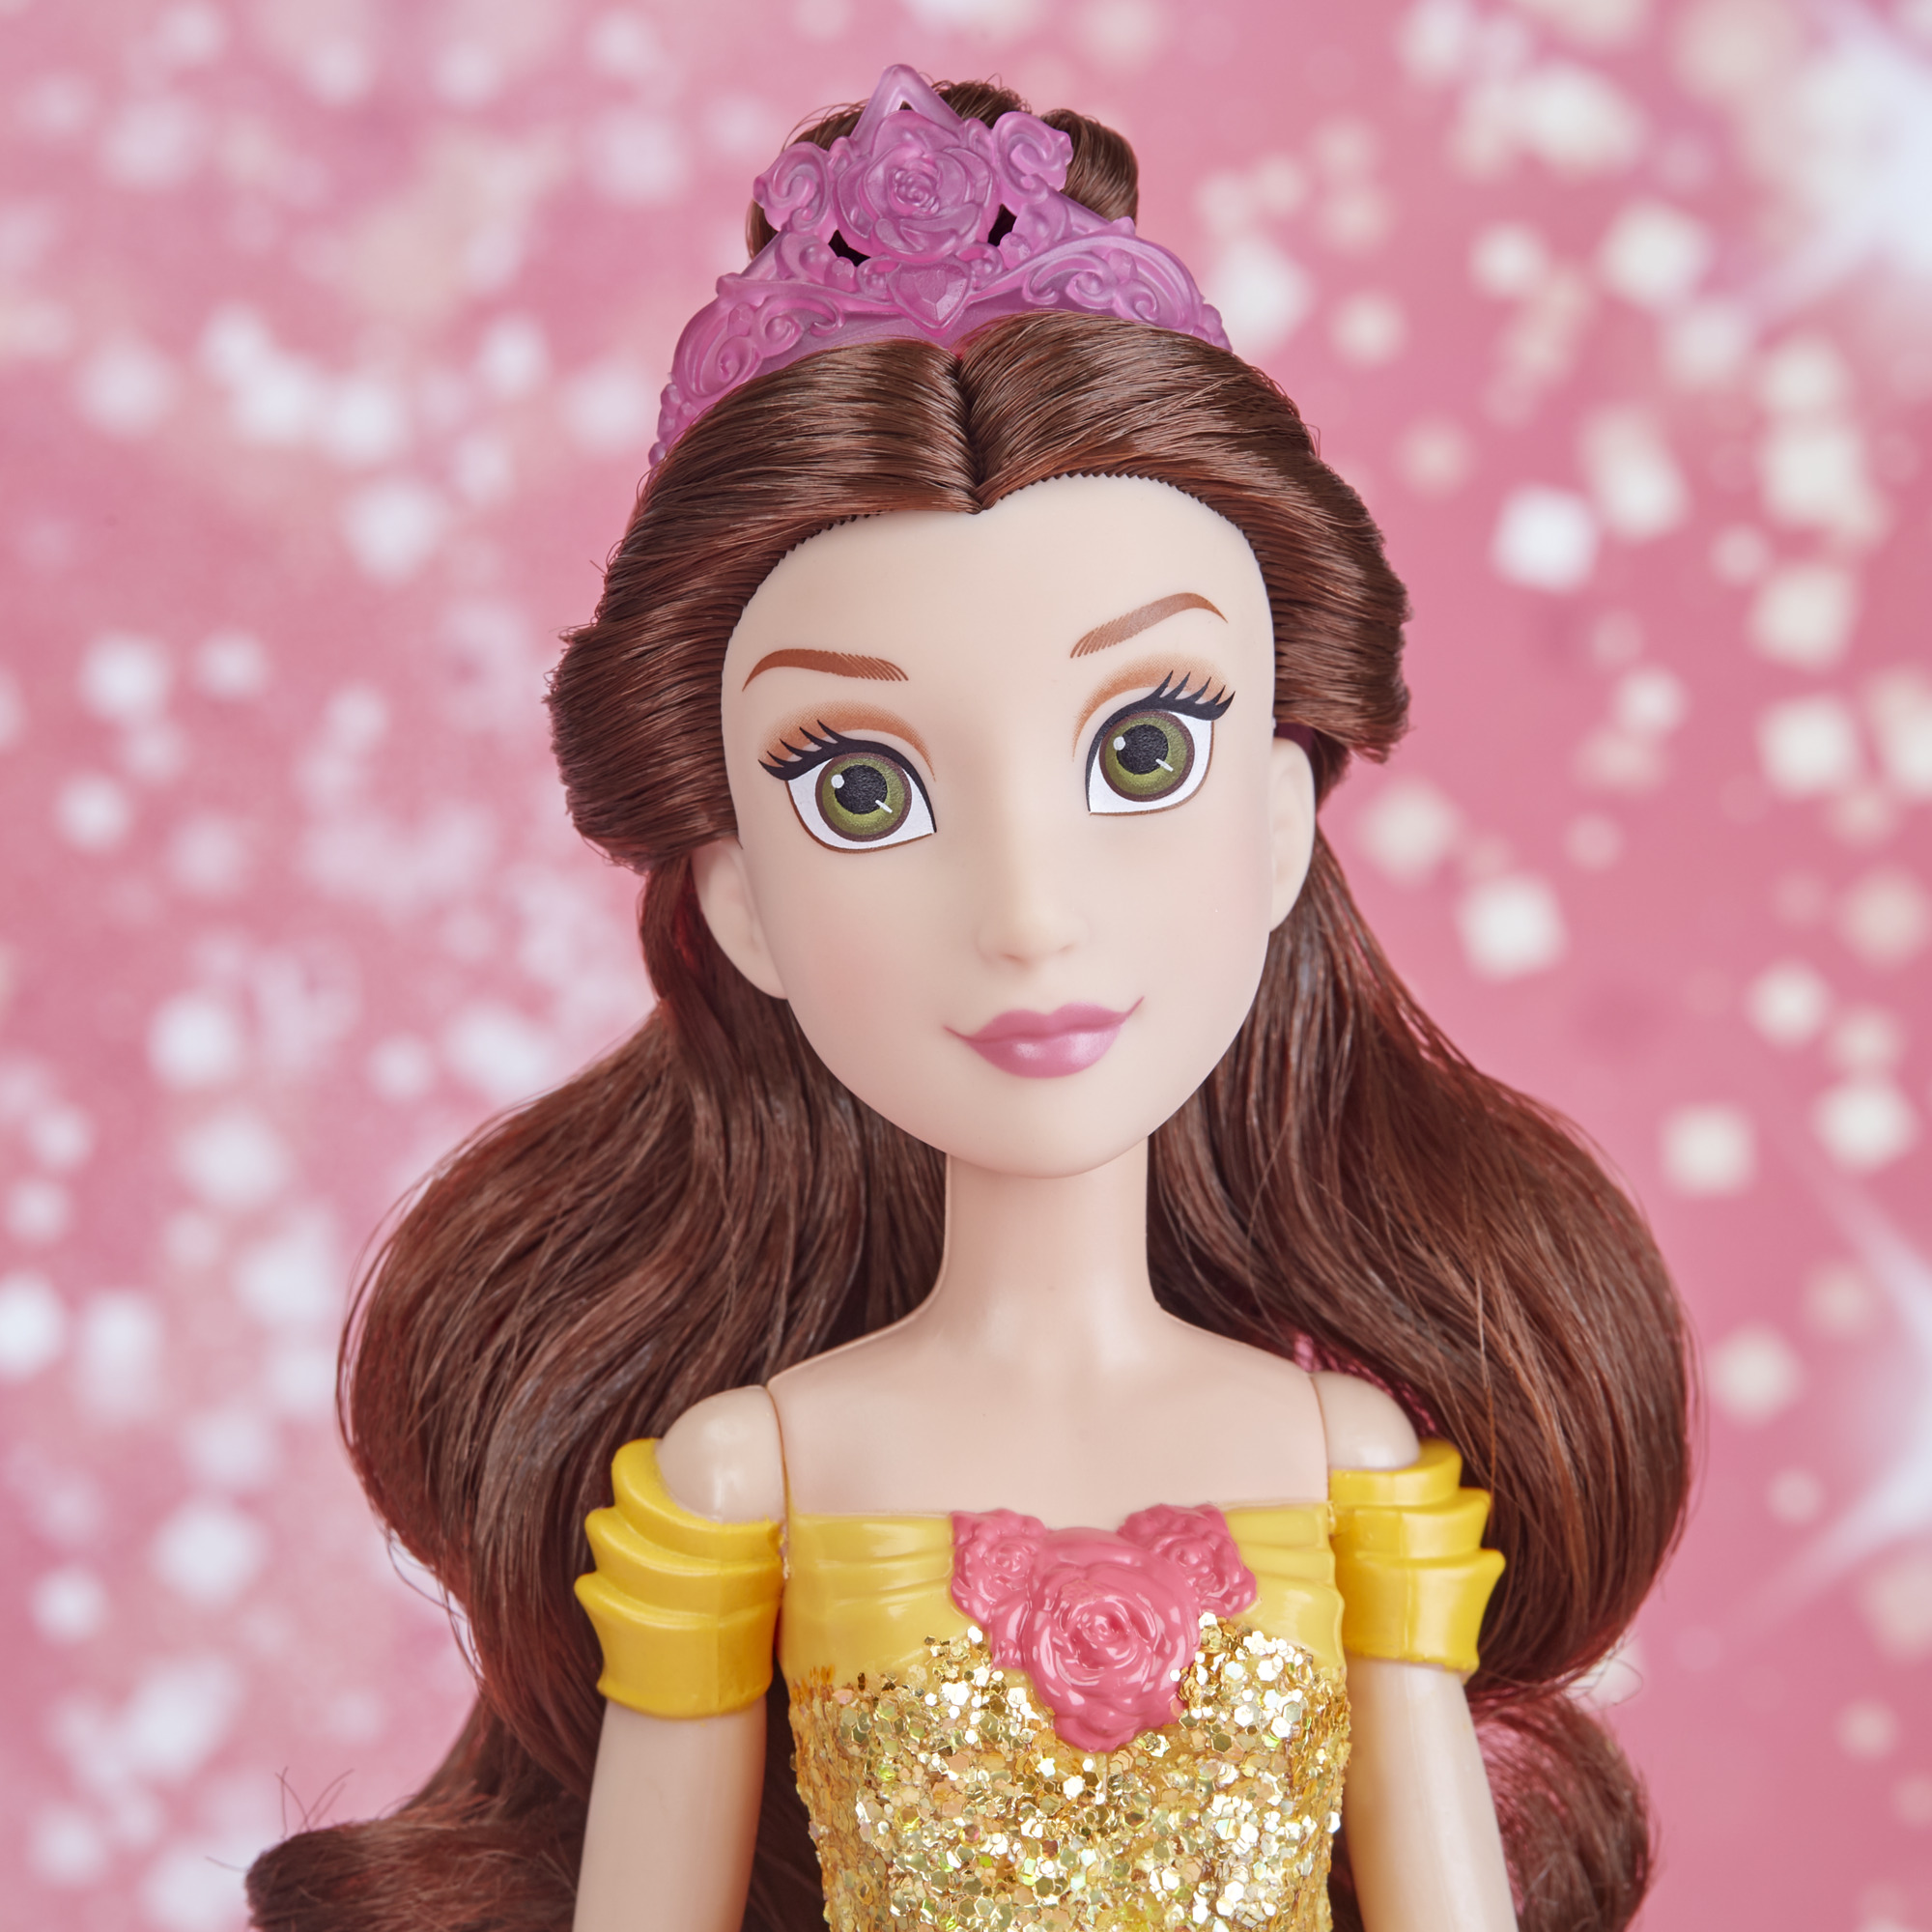 Disney Princess Royal Shimmer Belle with Sparkly Skirt, Includes Tiara and Shoes - image 12 of 16